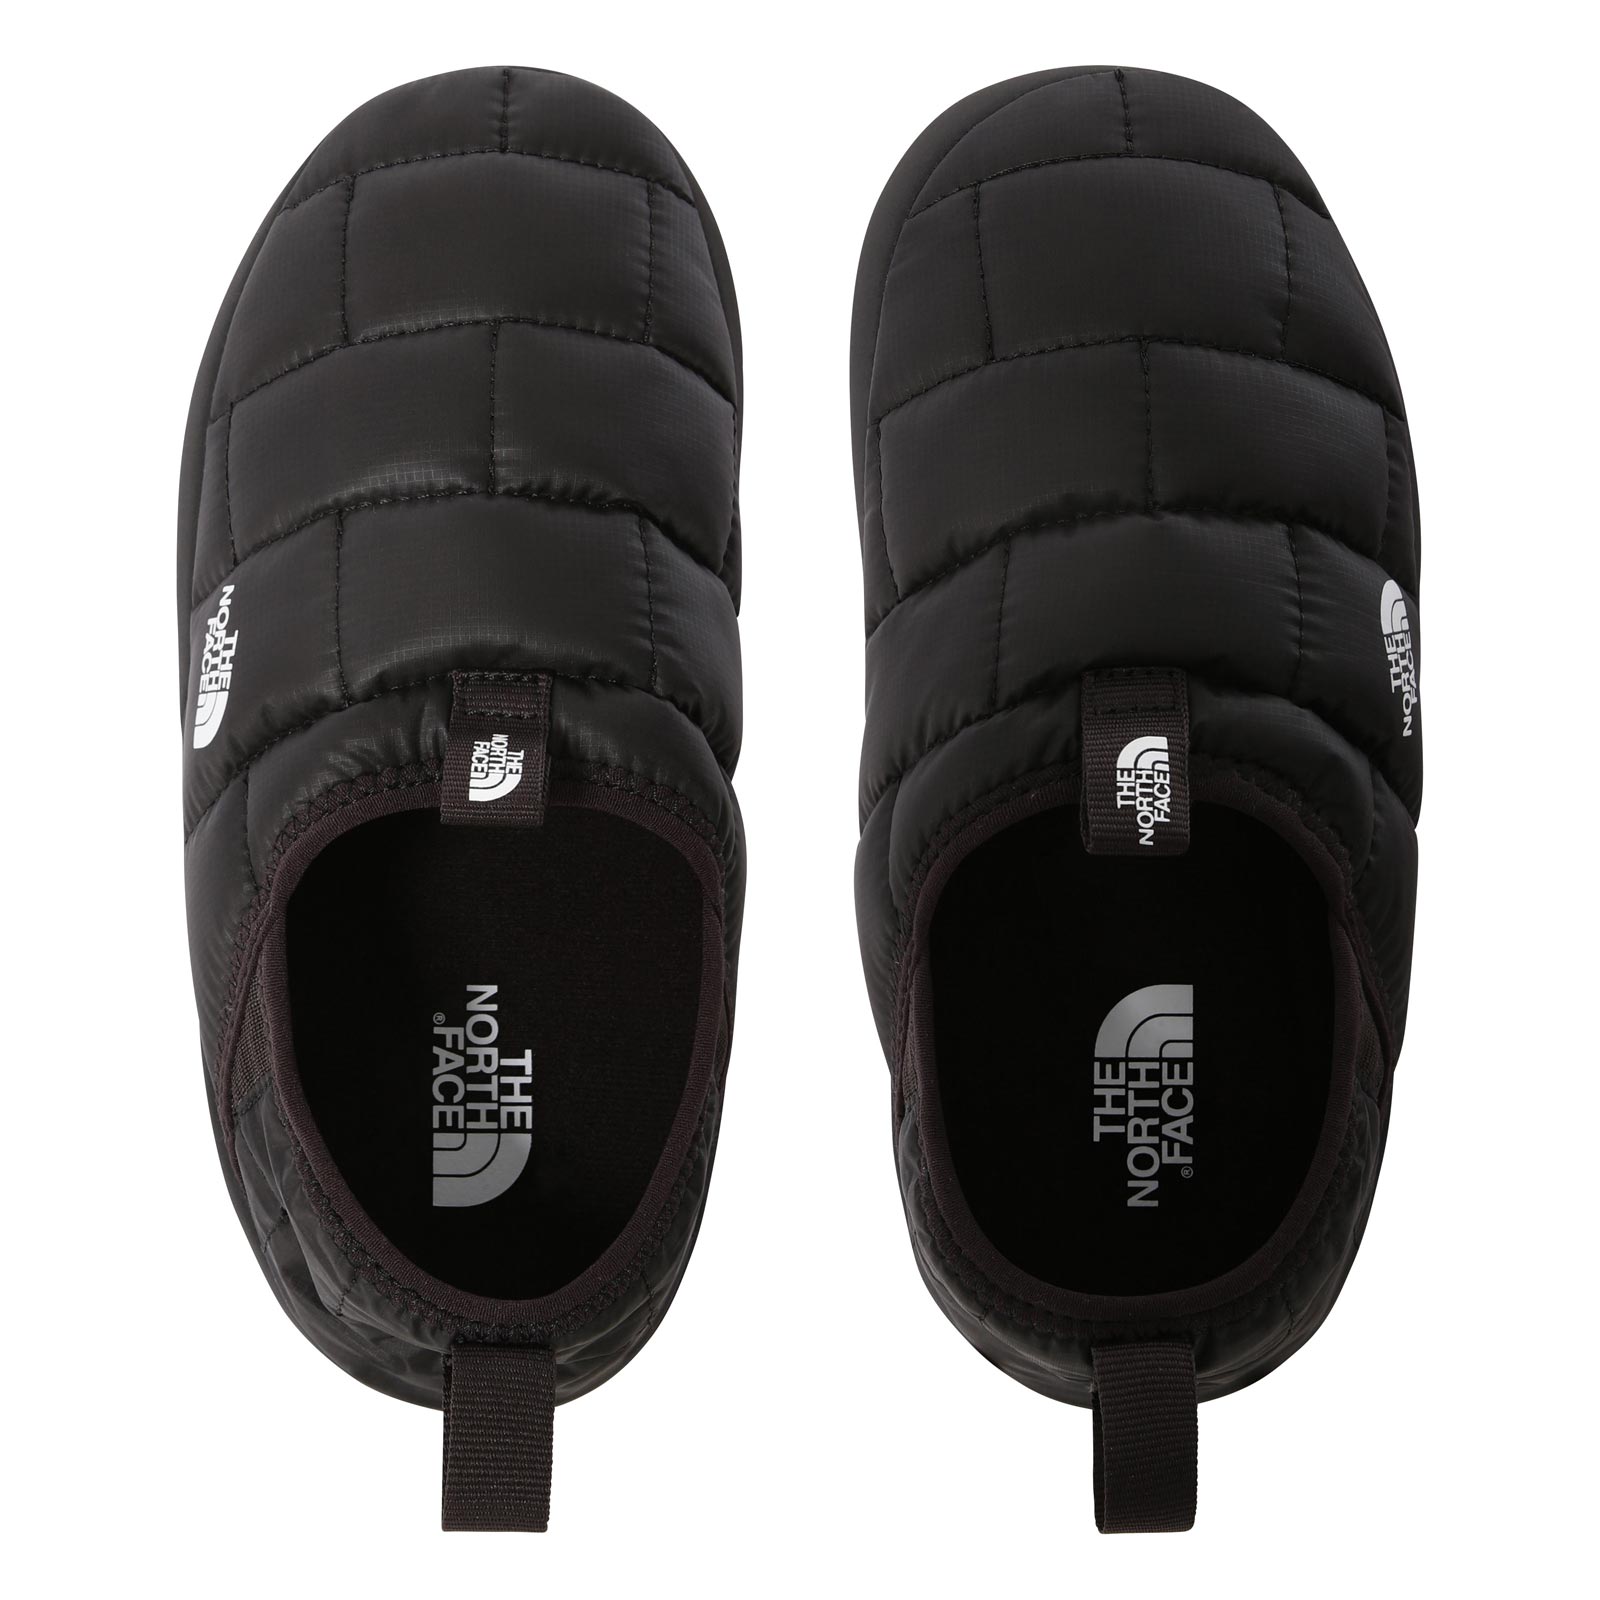 THE NORTH FACE THERMOBALL™ TRACTION JUNIOR KIDS WINTER SLIPPERS